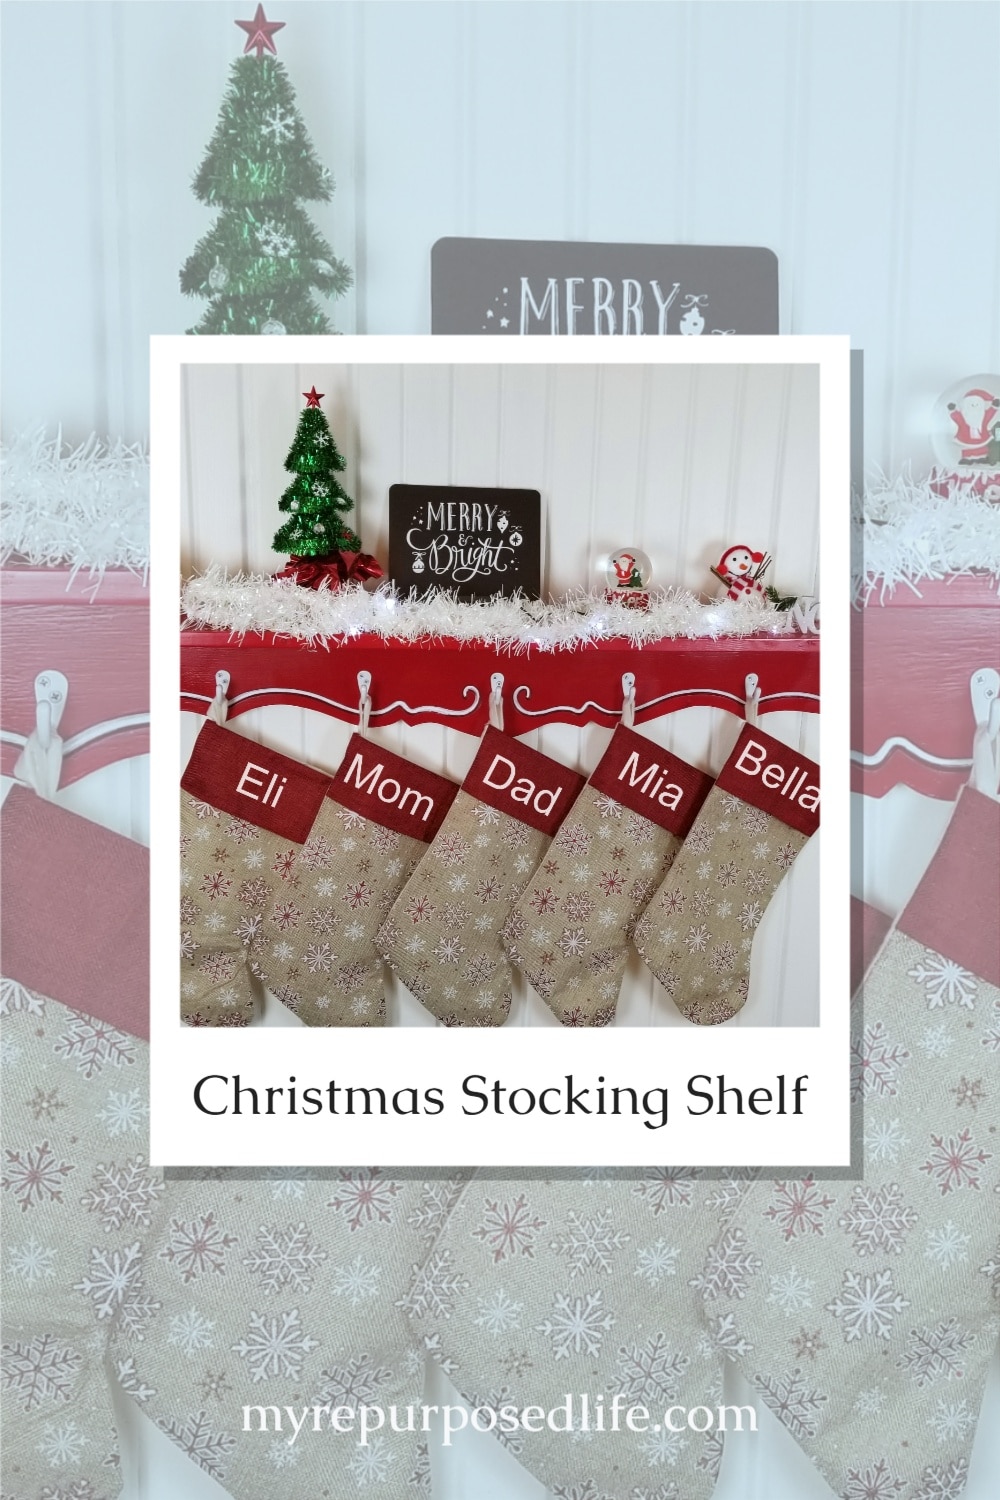 Easy step by step directions will show you how easy it is to make a Christmas Stocking Shelf for your family. You may not have a valance, but this could easily be made from two boards. #MyRepurposedLife #Christmas #stockingholder #shelf #easy #diy #project via @repurposedlife